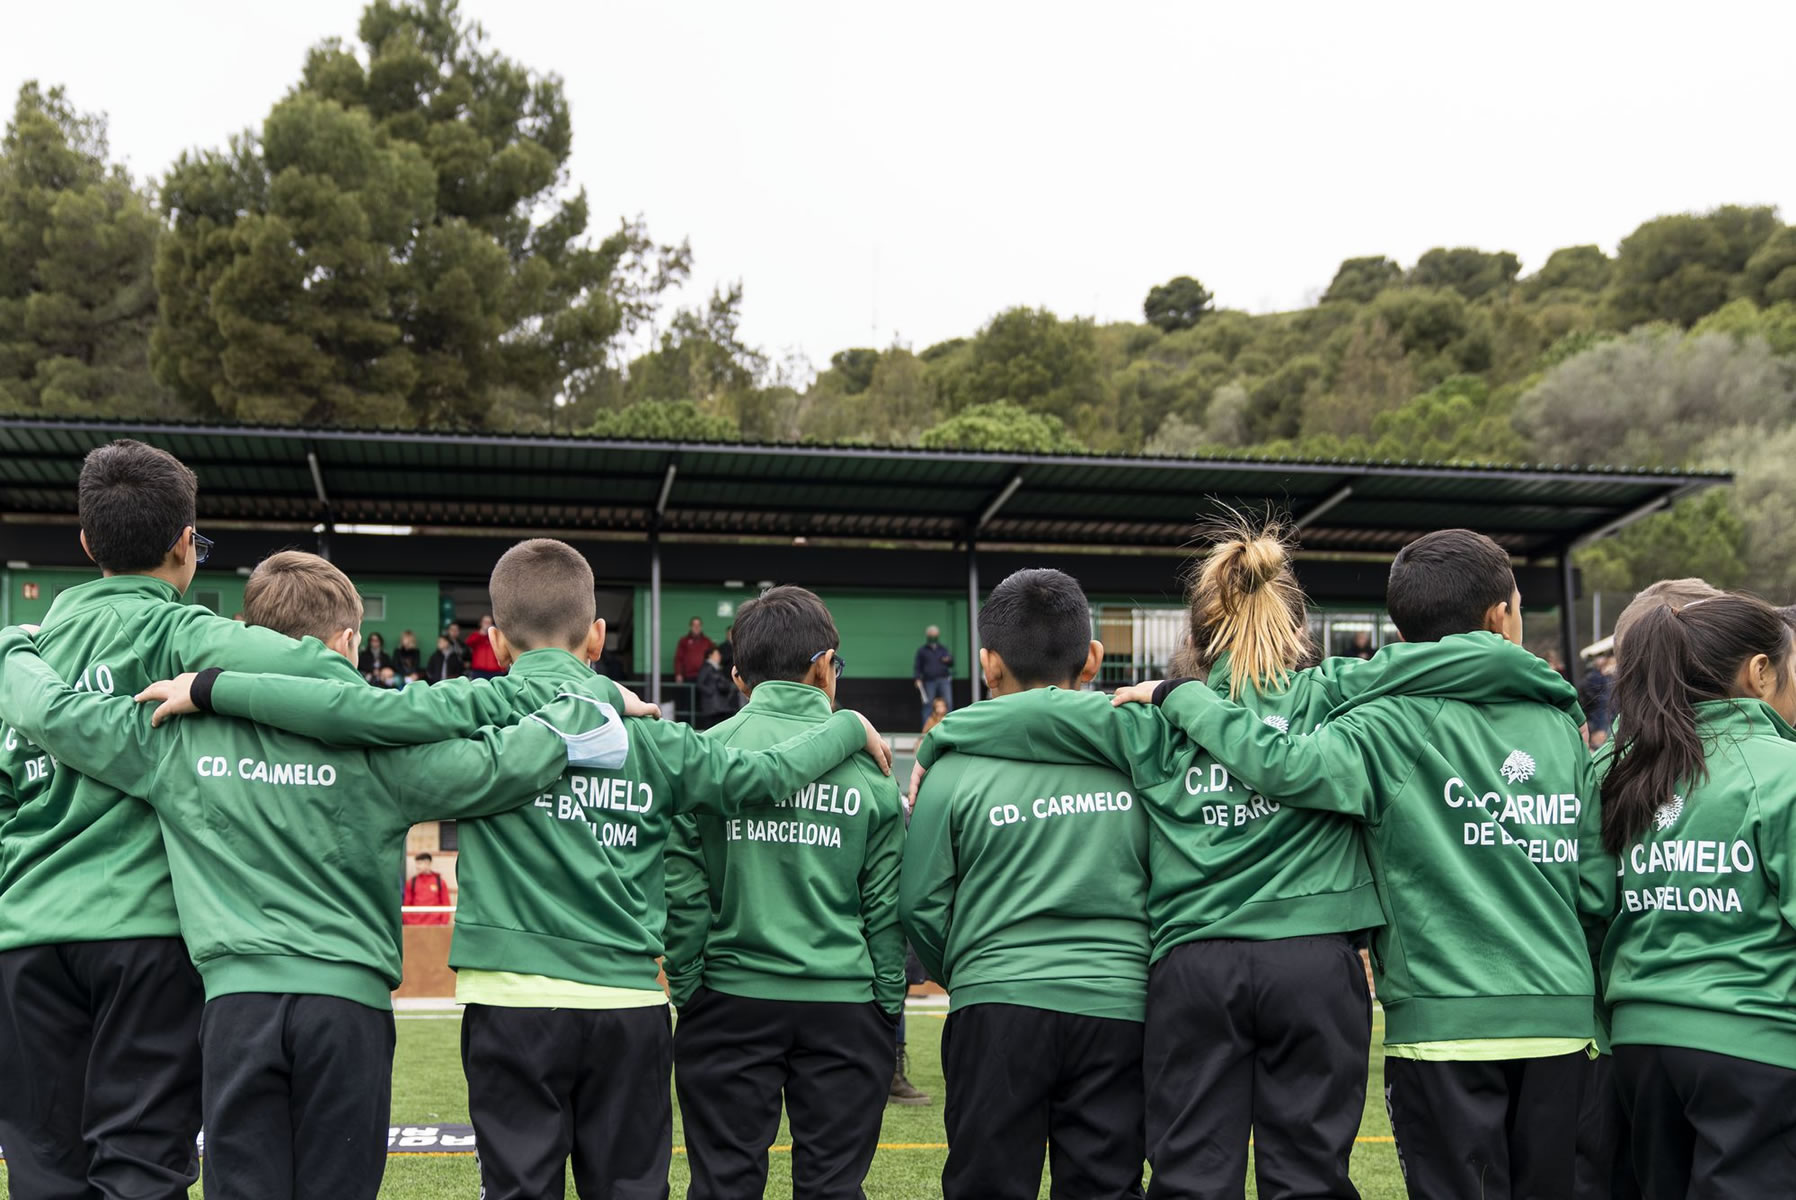 A team of child athletes with their backs turned and arms around each other looking at the football pitch